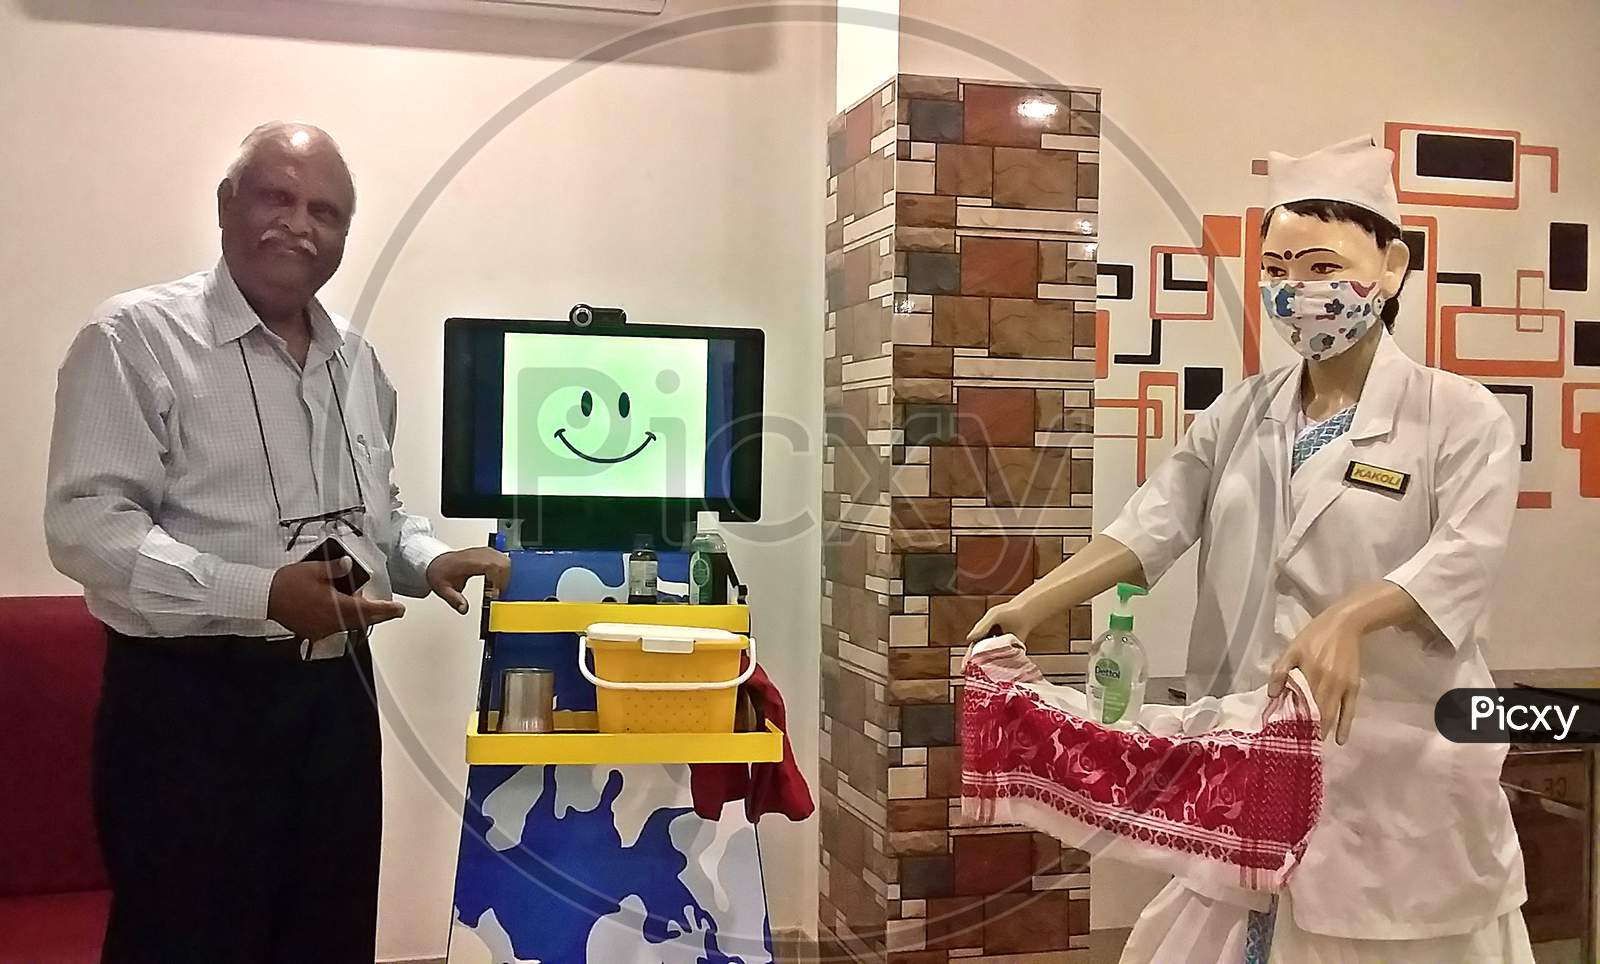 Assam Based Innovator SN Farid During A Demonstration Of robots which serve food and medicine to Covid-19 patients and facilitate virtual meeting with doctors, In Guwahati ,India